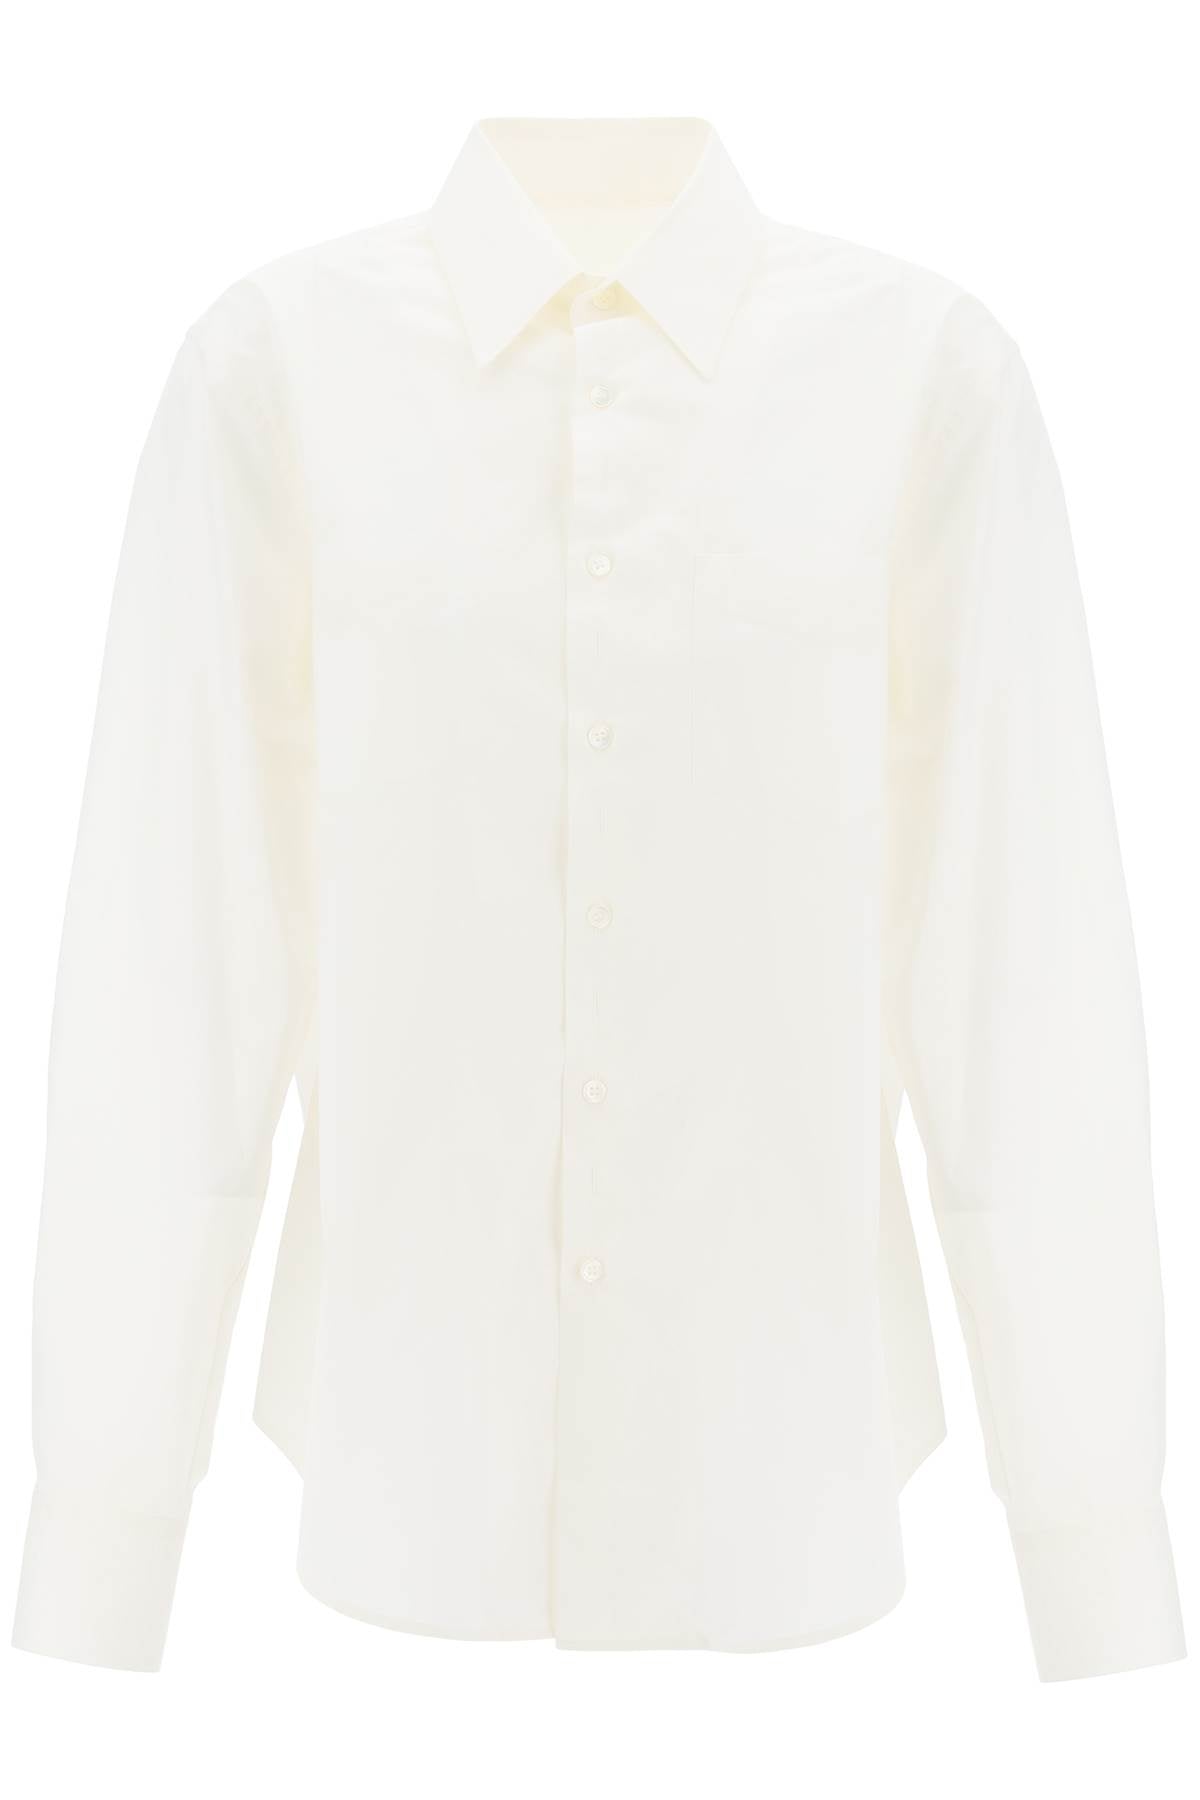 Mm6 Maison Margiela Cut Out Shirt With Open   White